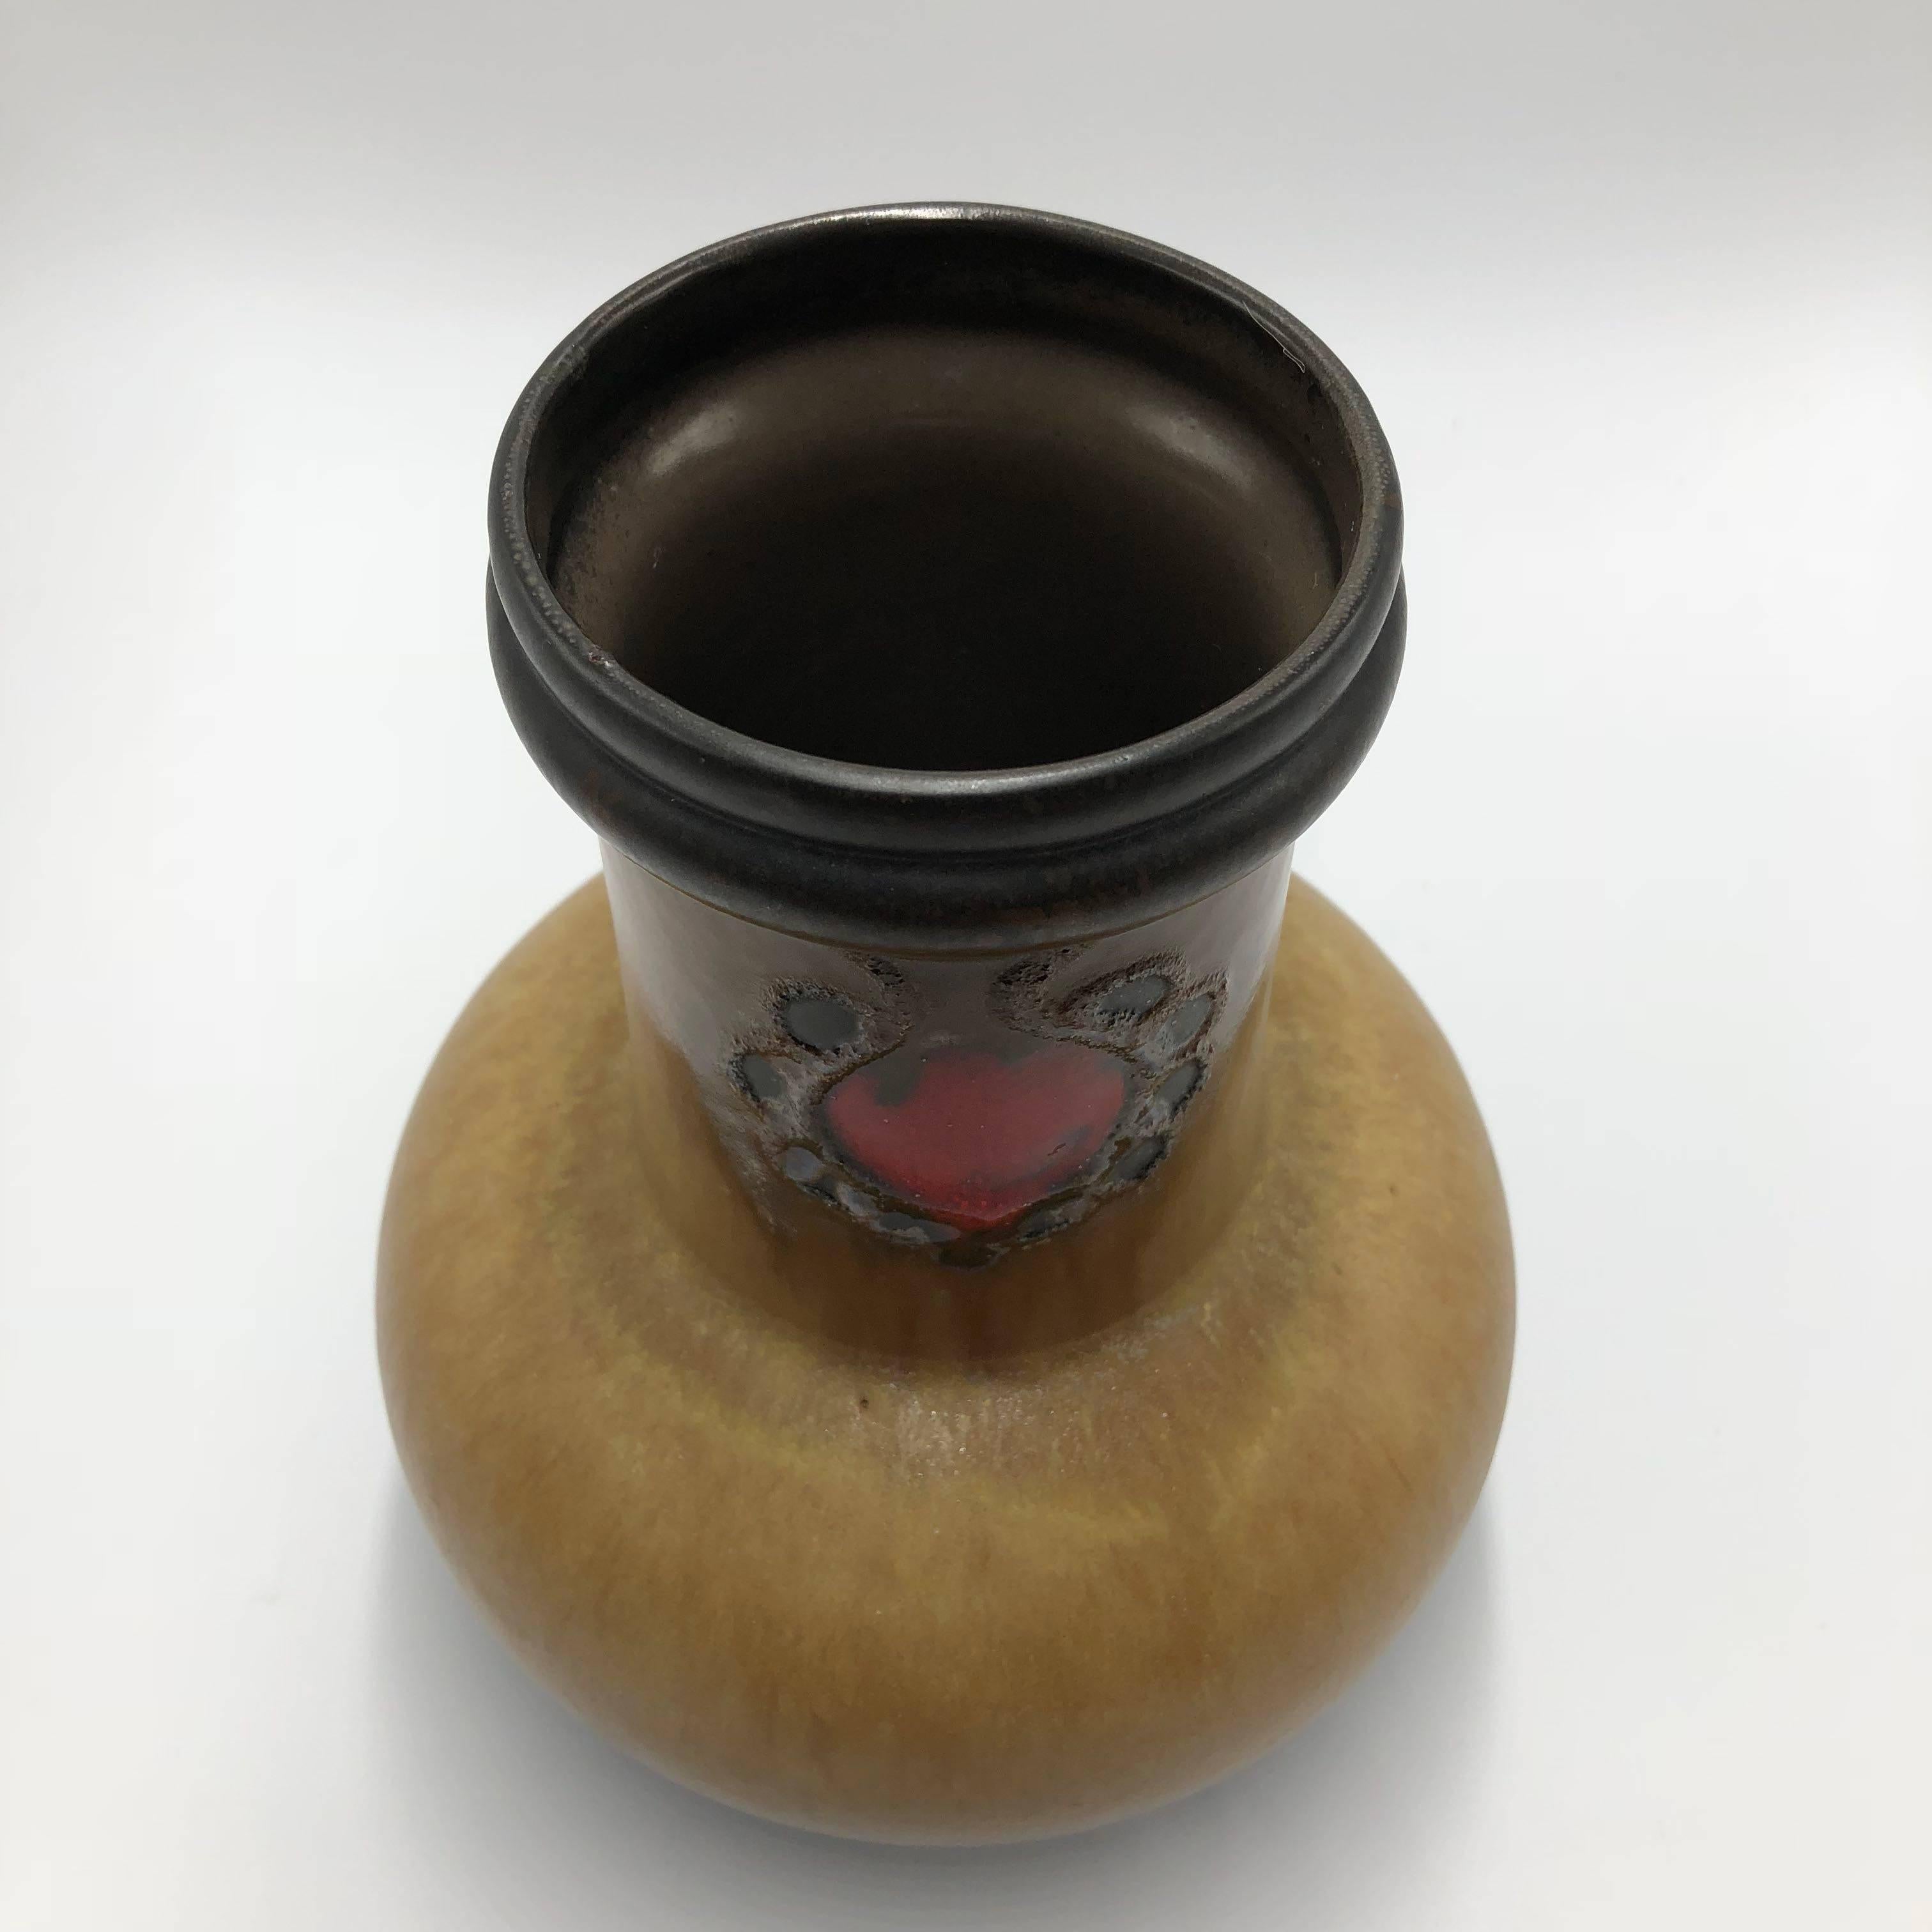 Ceramic vase in excellent condition manufactured by Strehla (GDR former East Germany) Identification. Dark brown edges and inside, the centre of the vase is beige with a beautiful red floral image.

The great majority of Strehla items are marked